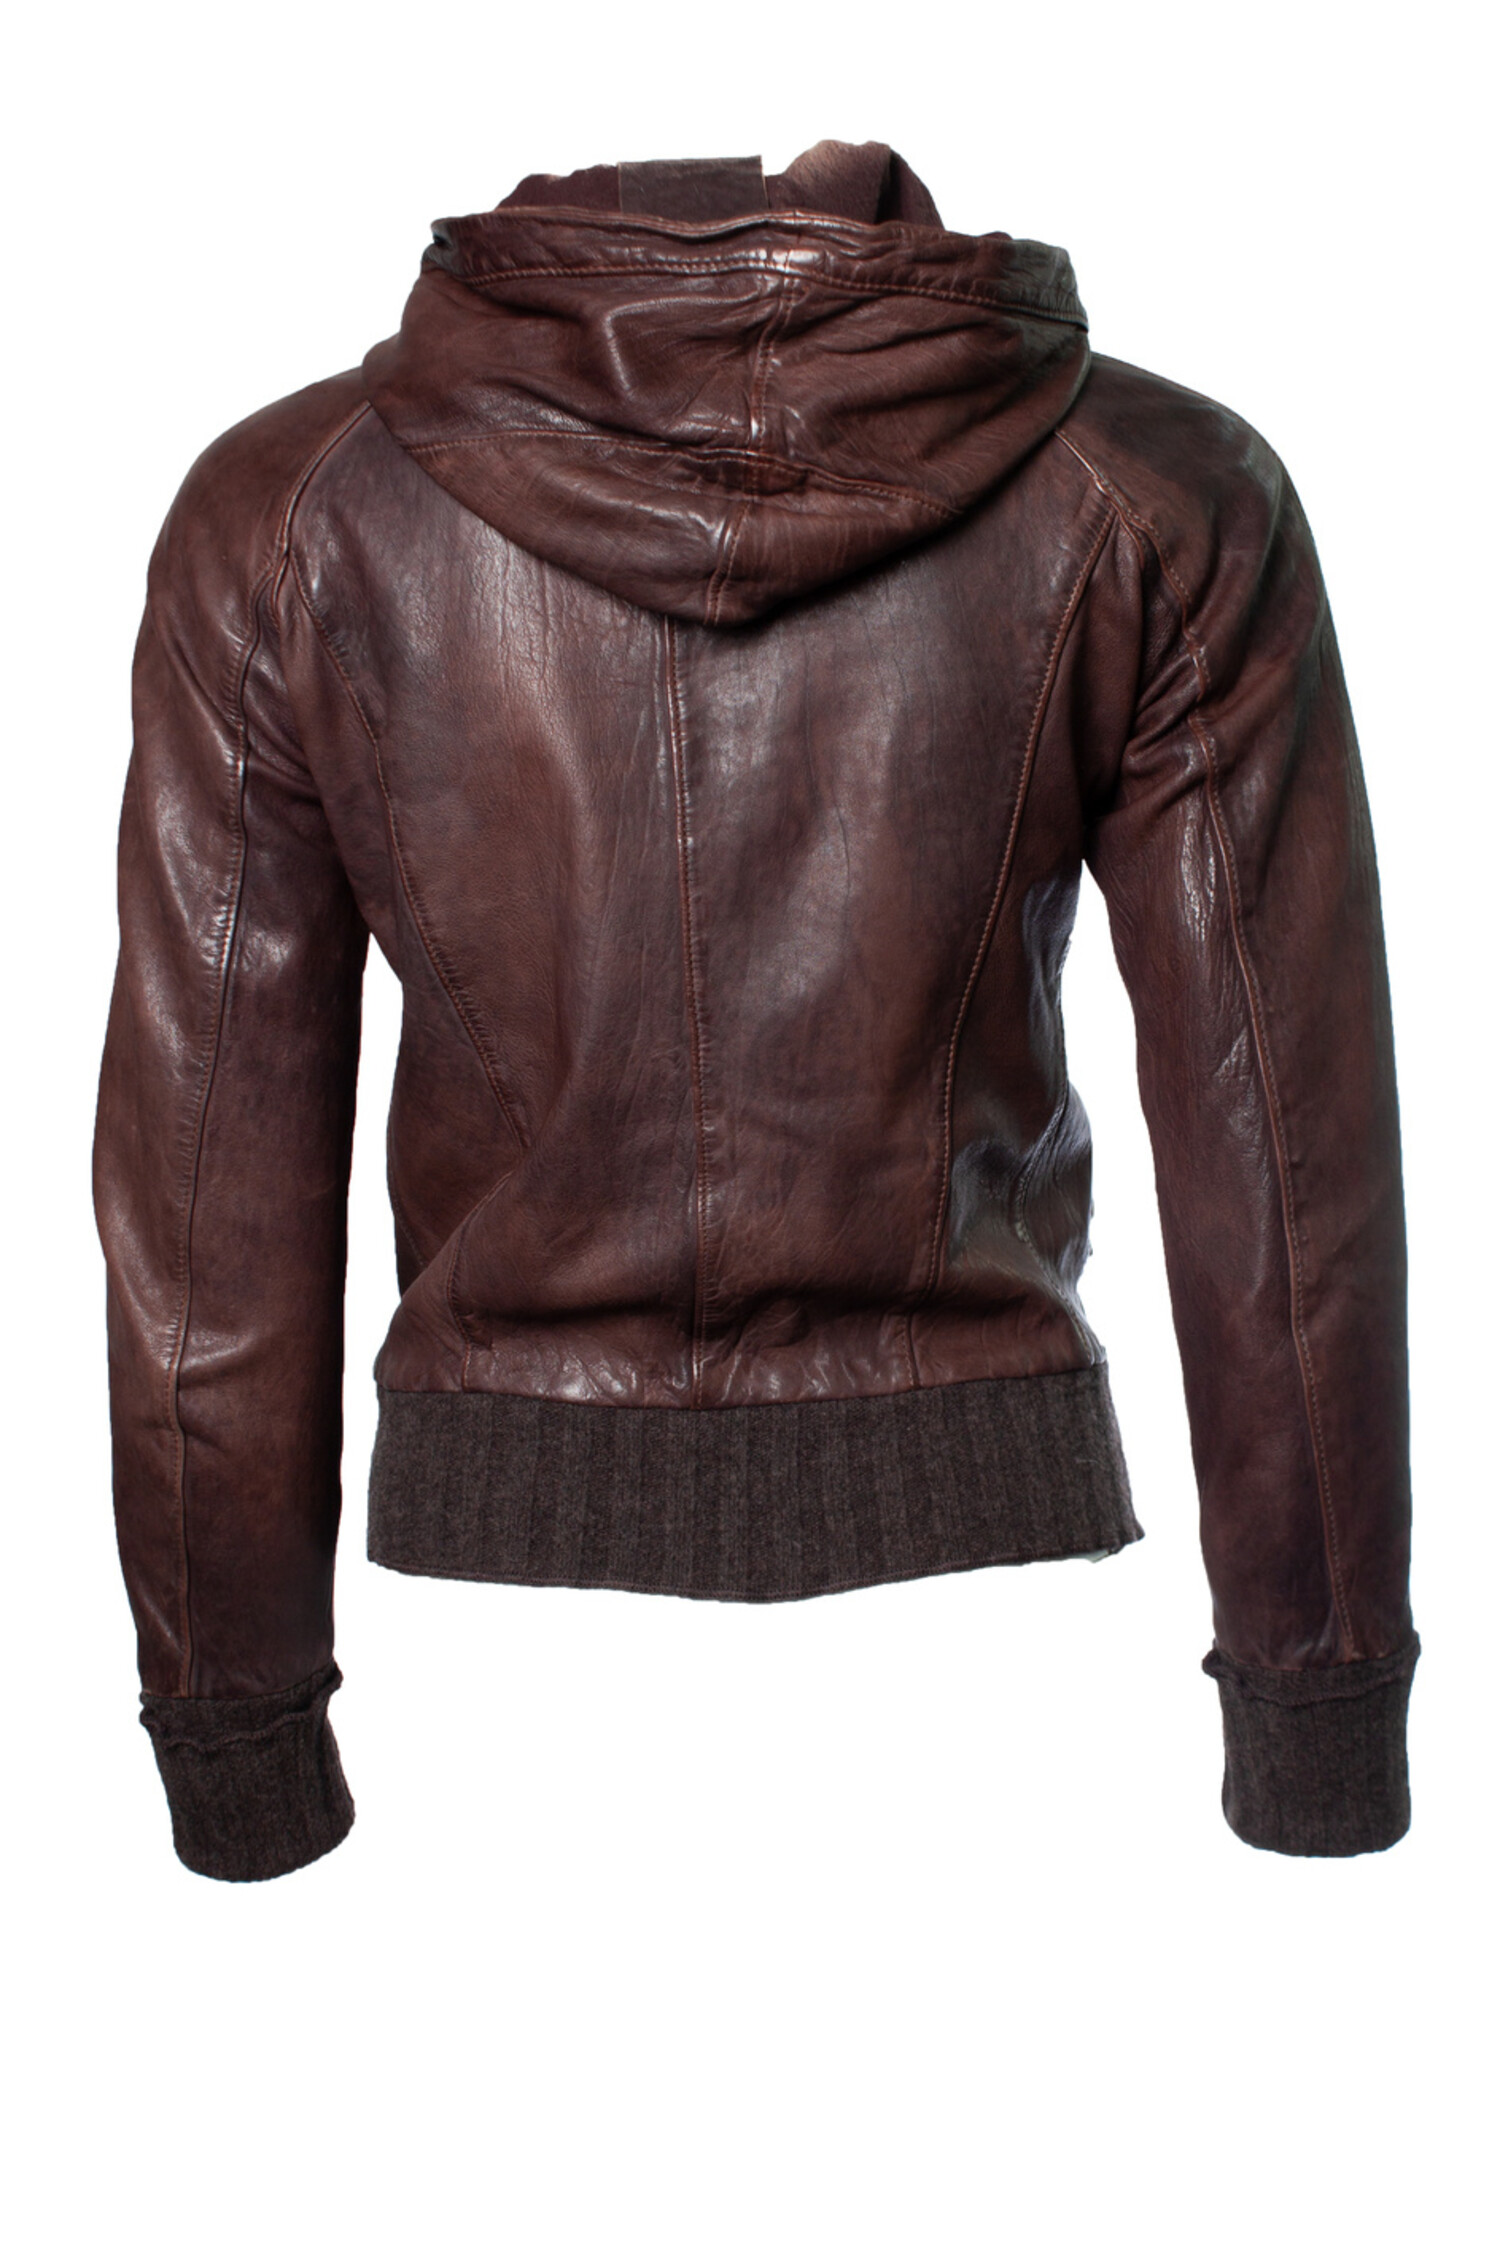 Womens Hooded Leather Jackets ⋆ From My Mothers Garden ⋆